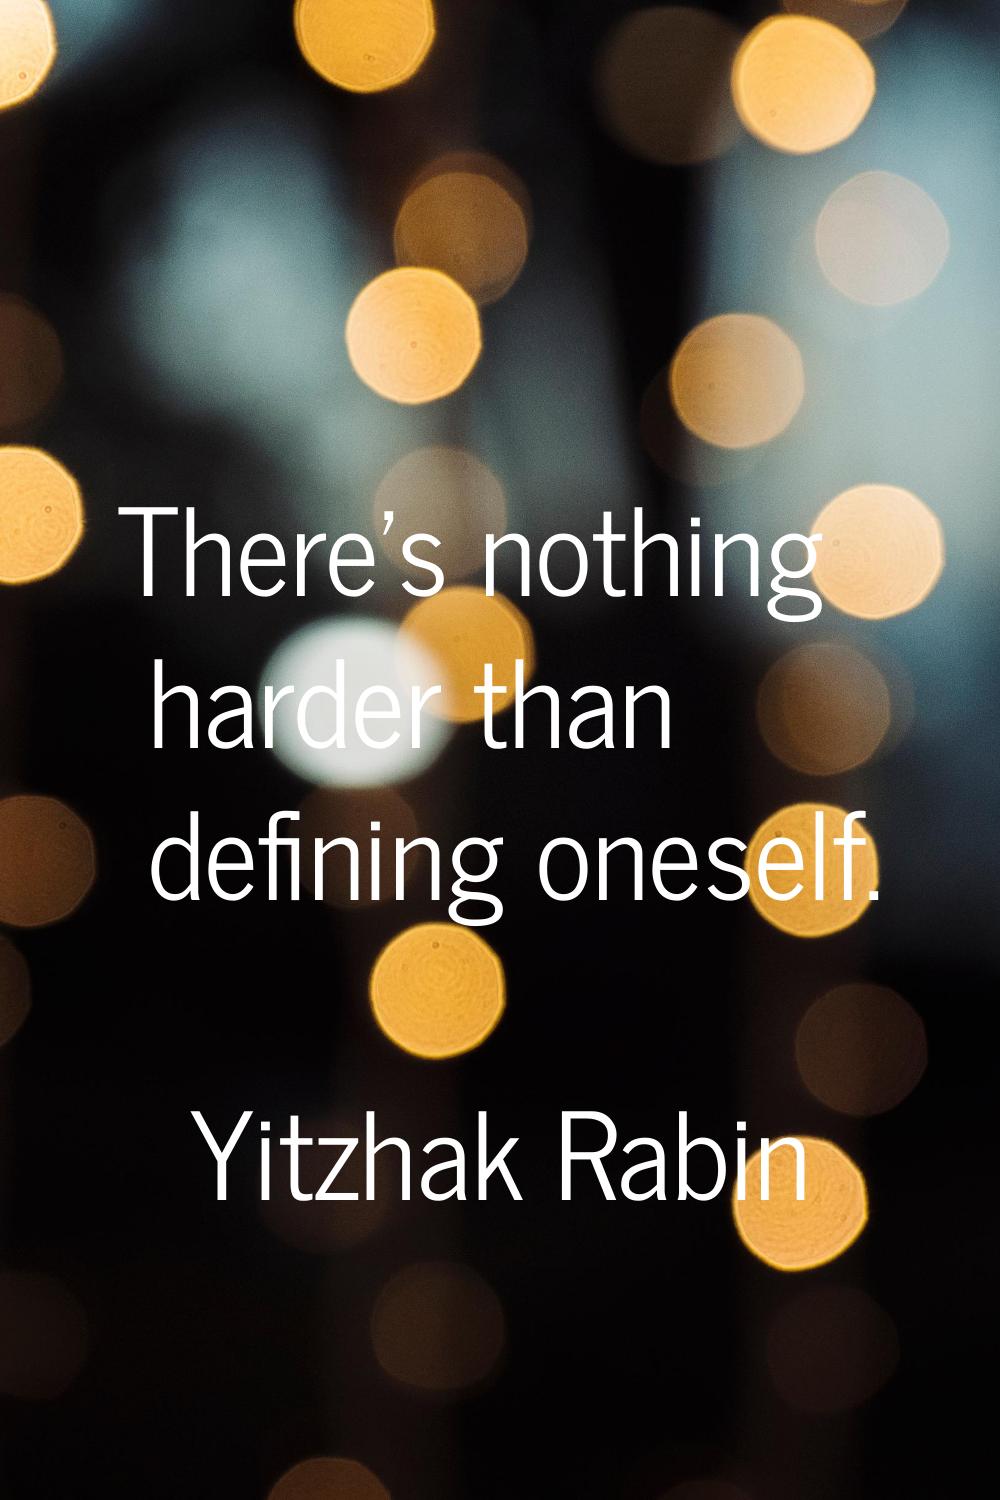 There's nothing harder than defining oneself.